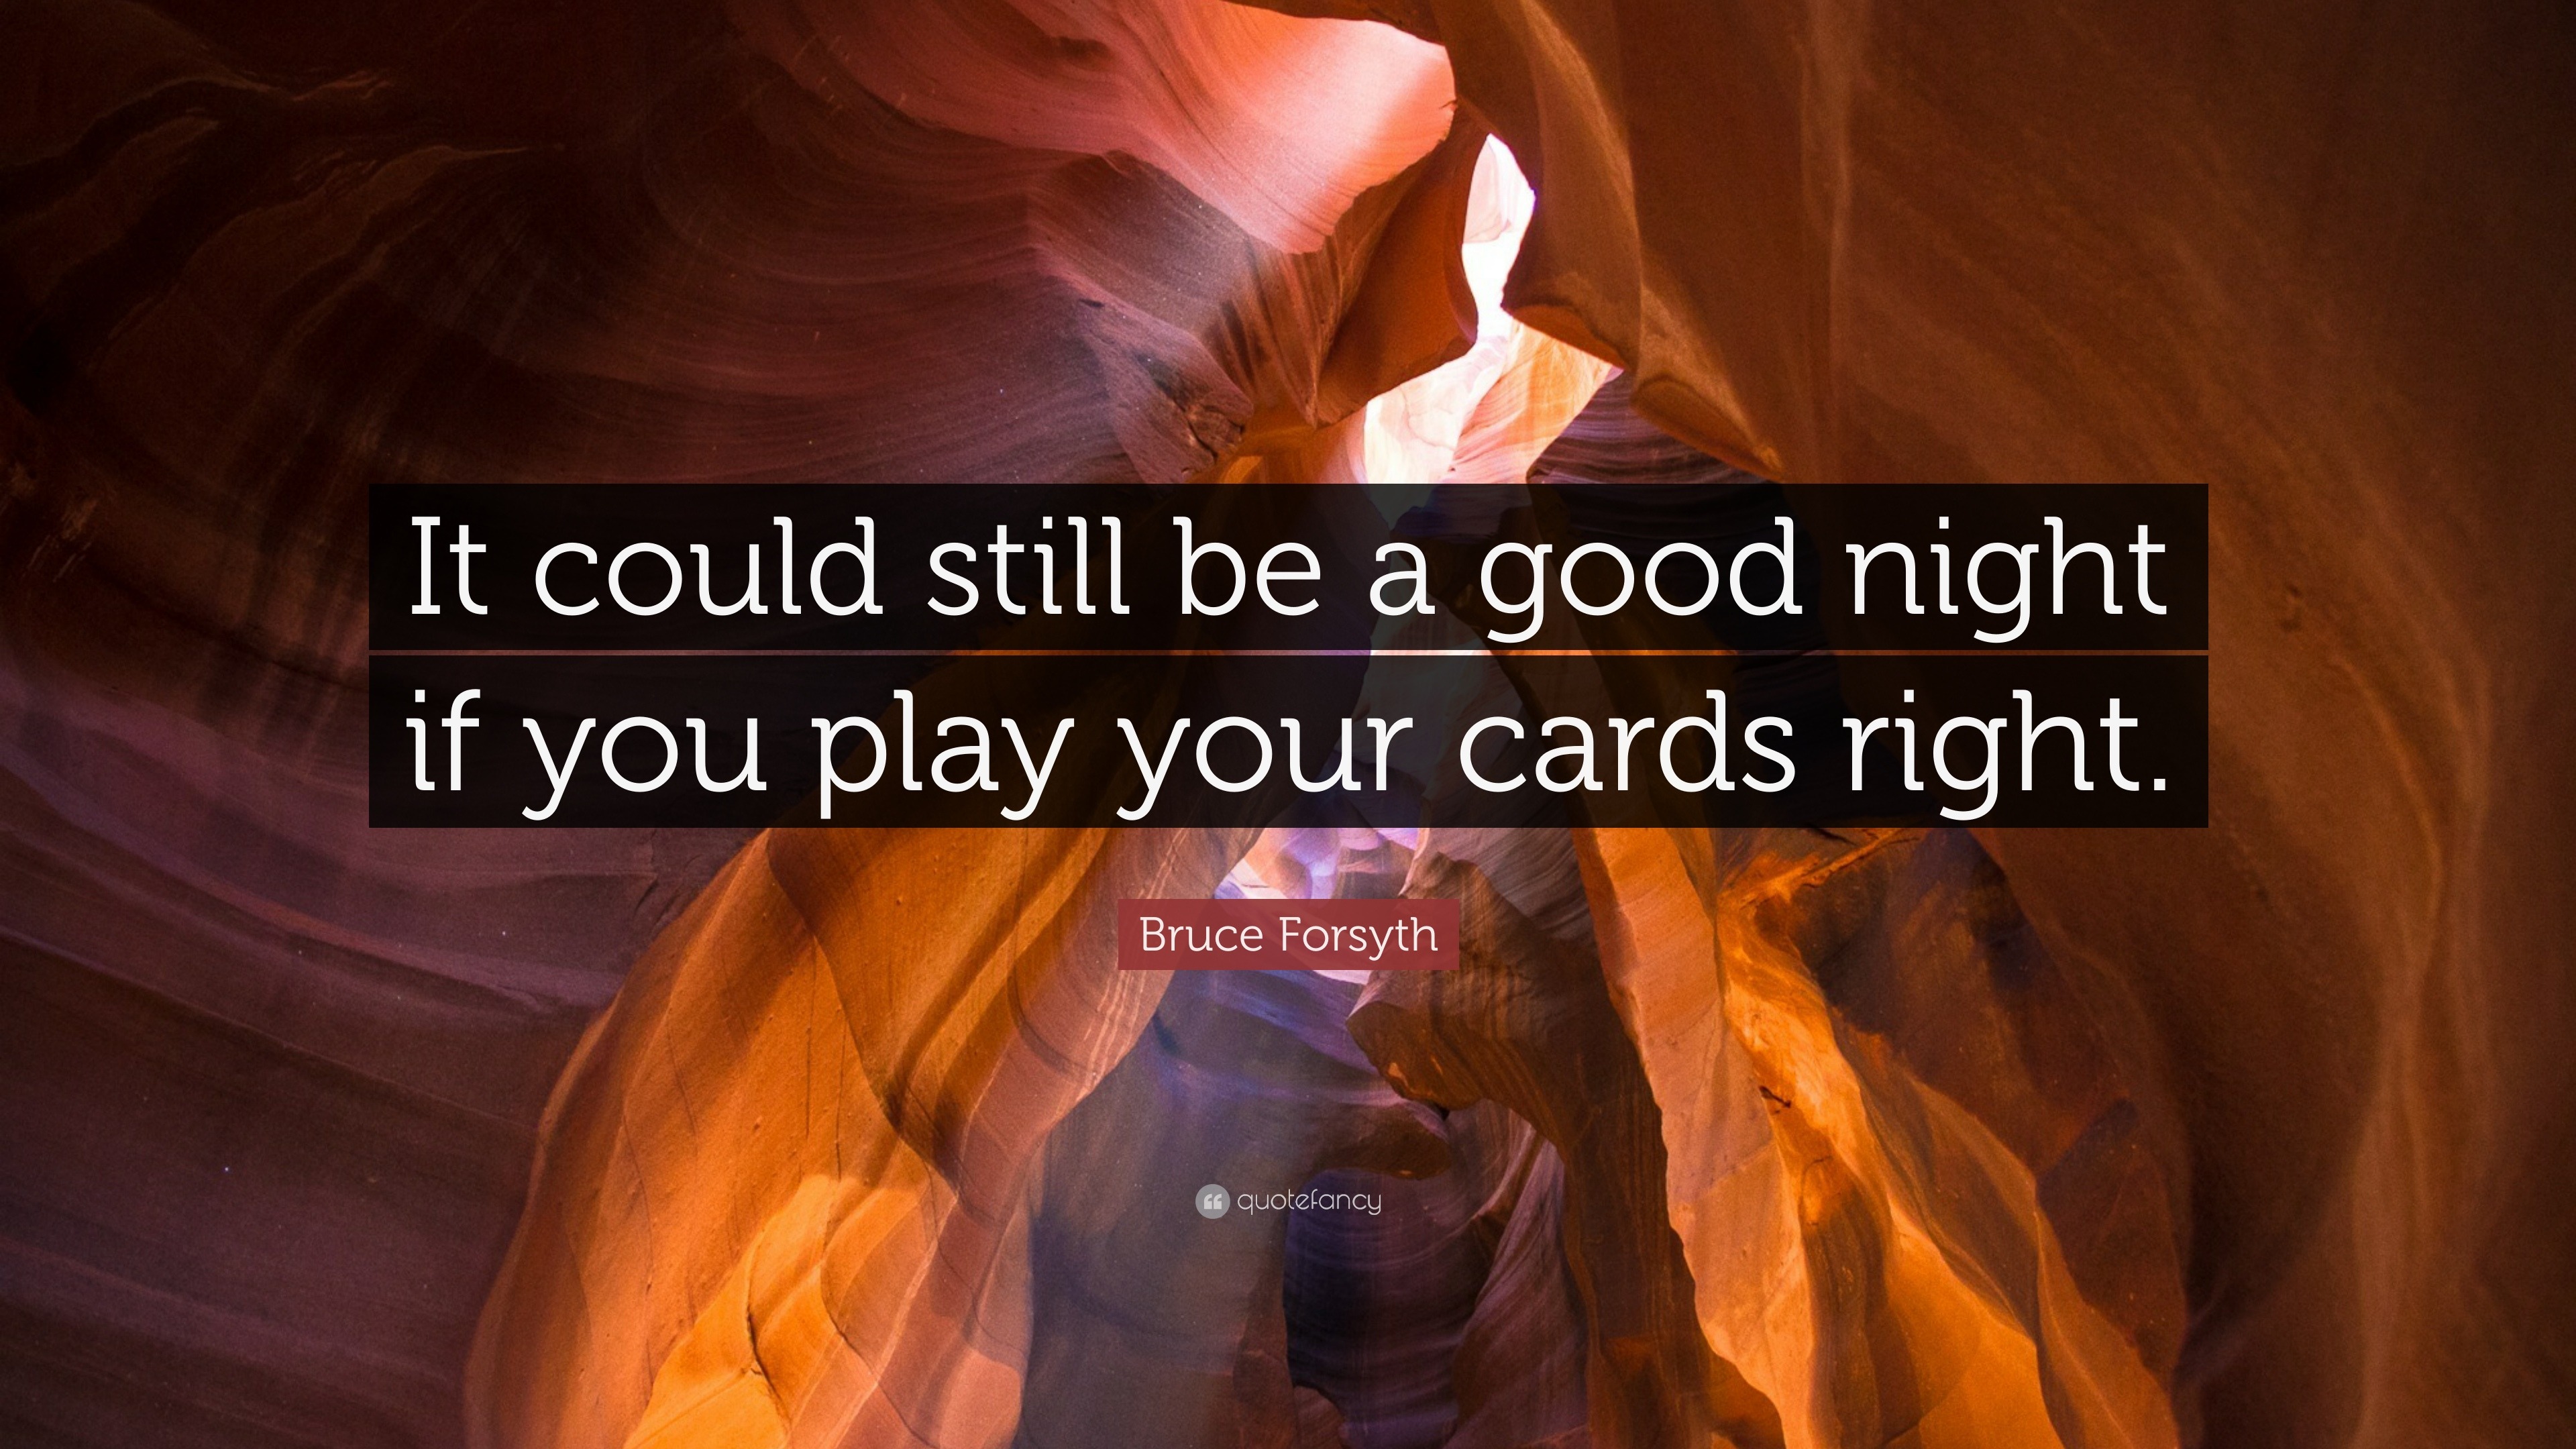 Bruce Forsyth Quote It Could Still Be A Good Night If You Play